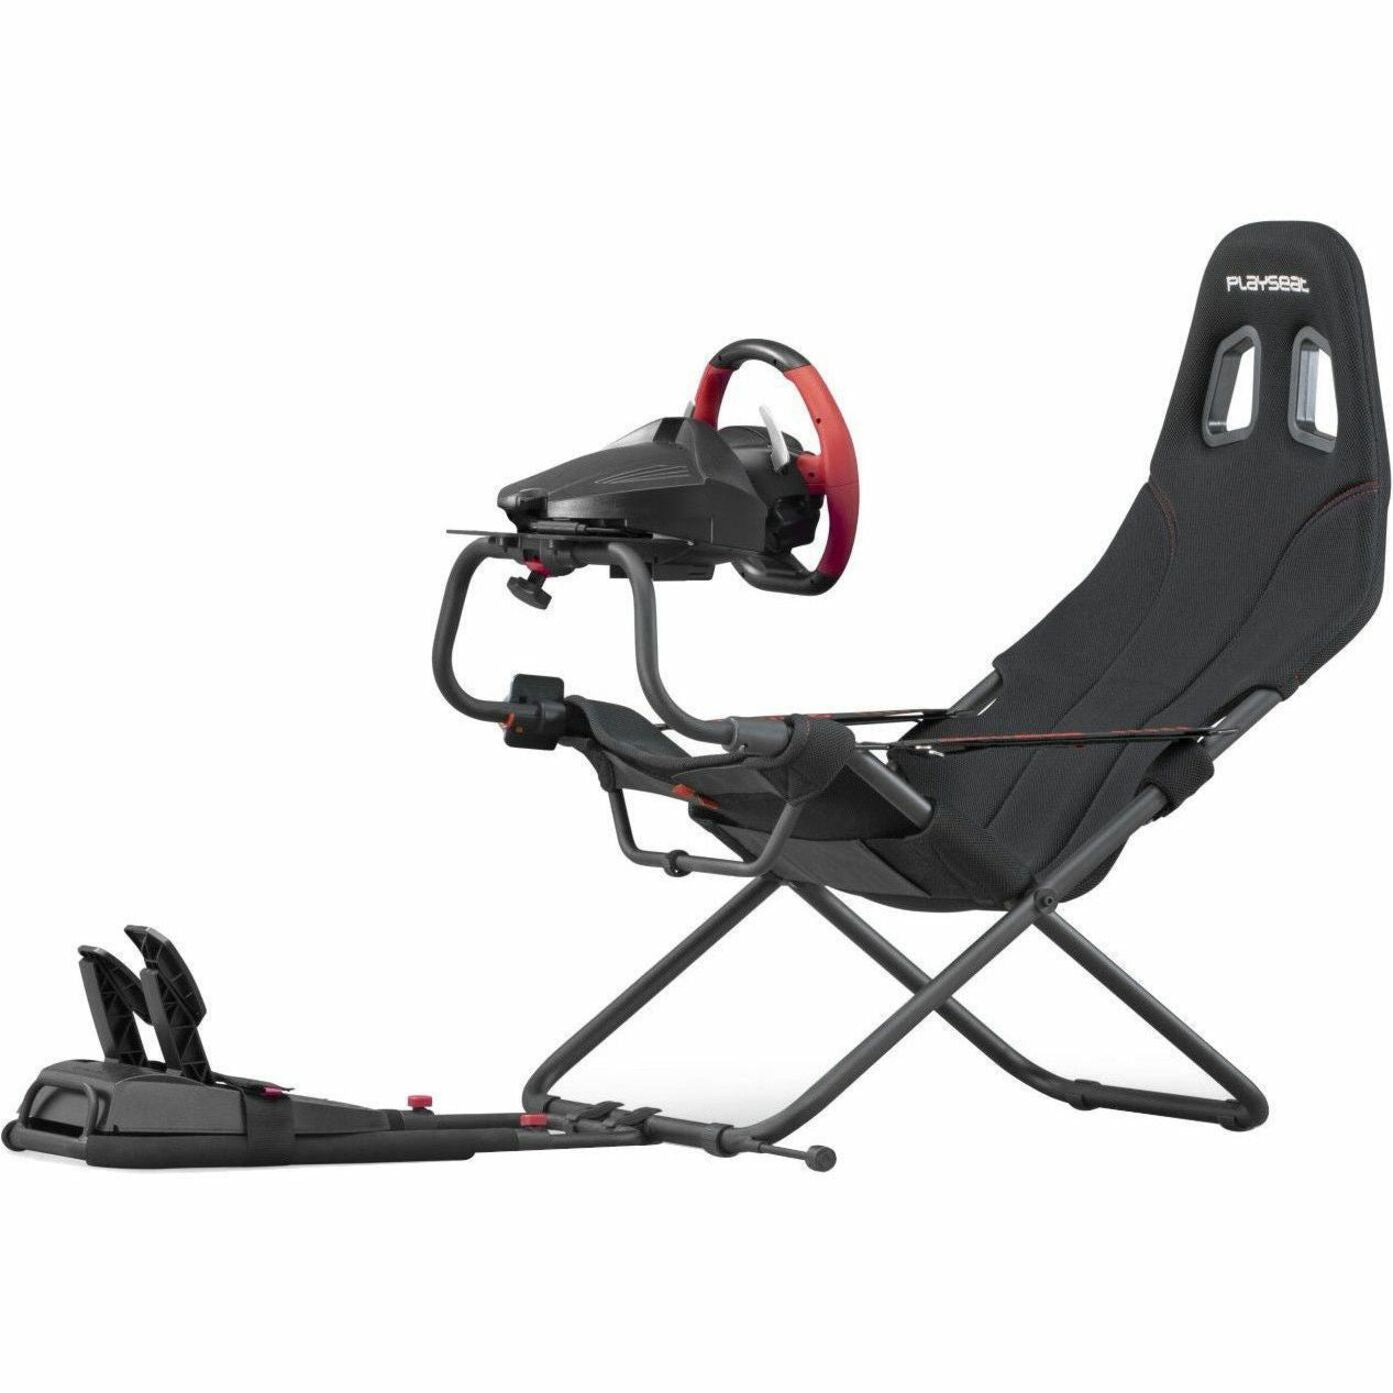 Playseats Edition Challenge ActiFit Gaming Chair (rc-00312)